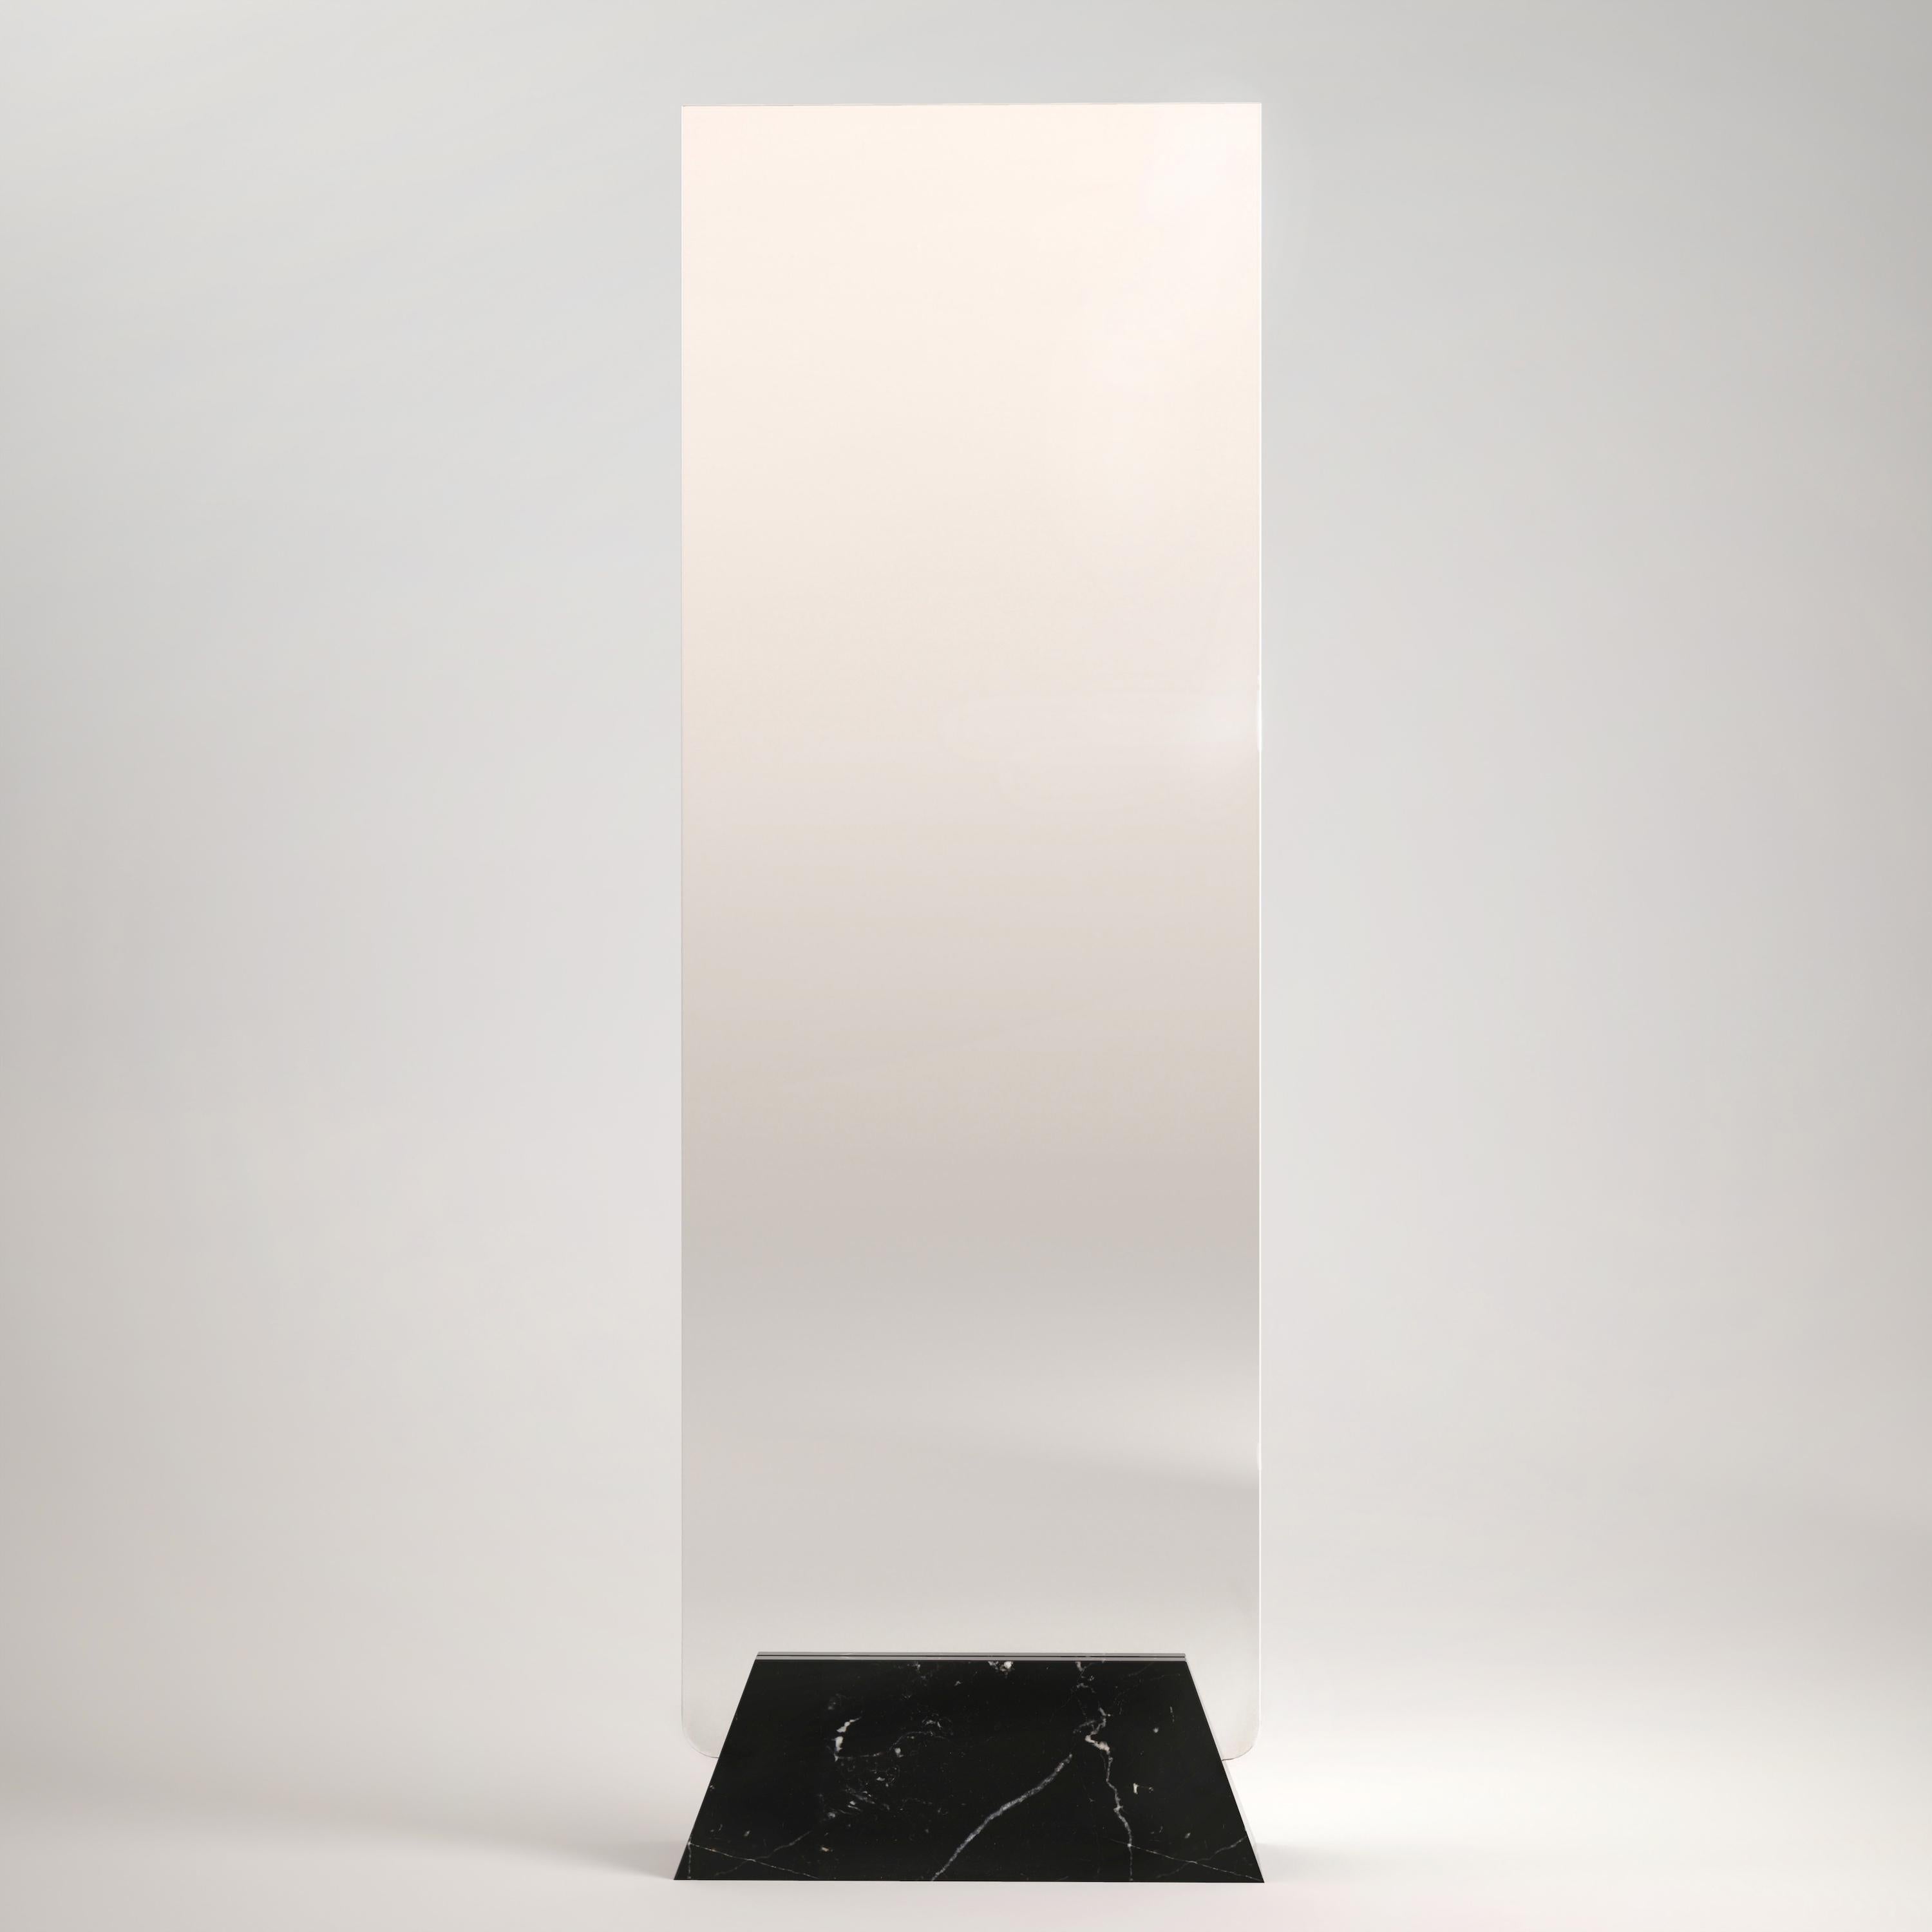 About
Minimalist Cressida Floor Mirror, Marble and Crystal Glass for October Gallery

Cressida Floor Mirror
Design by CARCINO Design exclusively for October Gallery
Floor Mirror
Materials: Black Marquina Marble, Mirror Glass
Dimensions: H 180 W 60 D